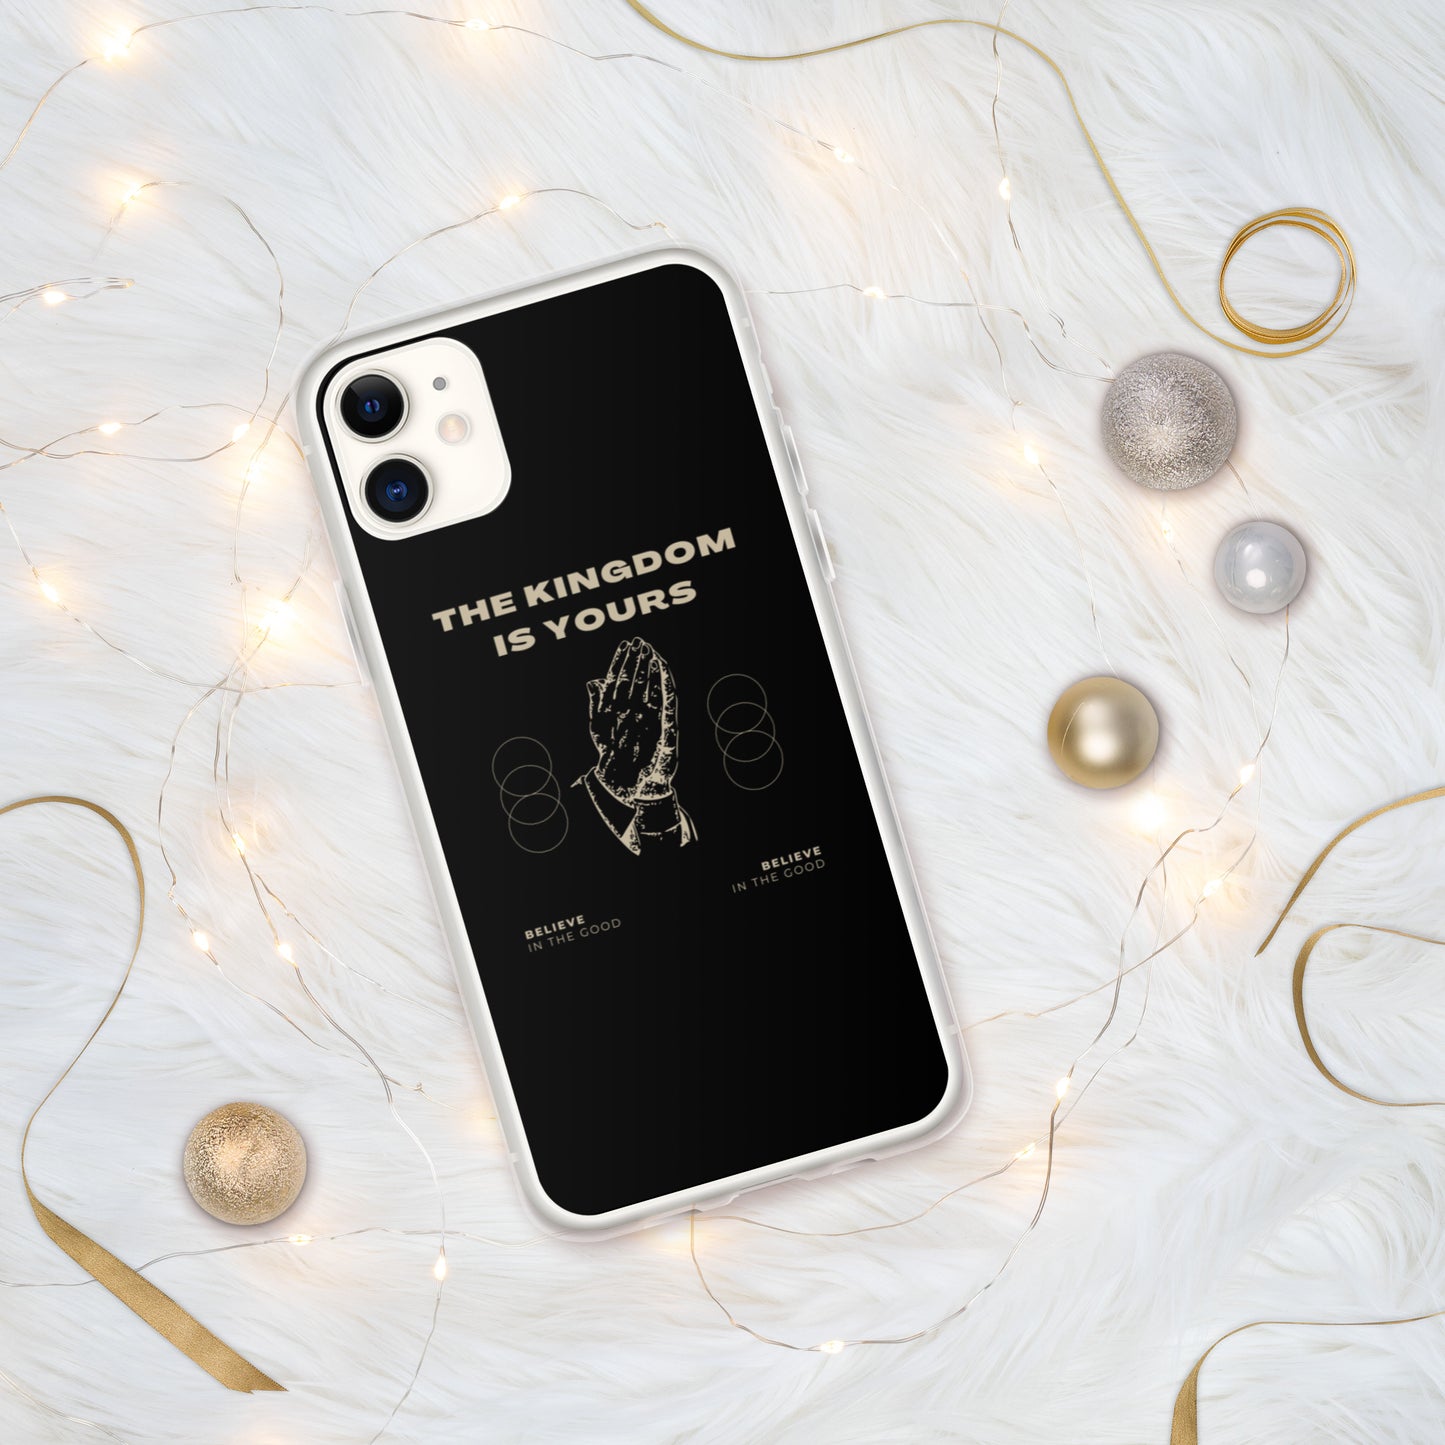 The Kingdom Is Yours - iPhone Case